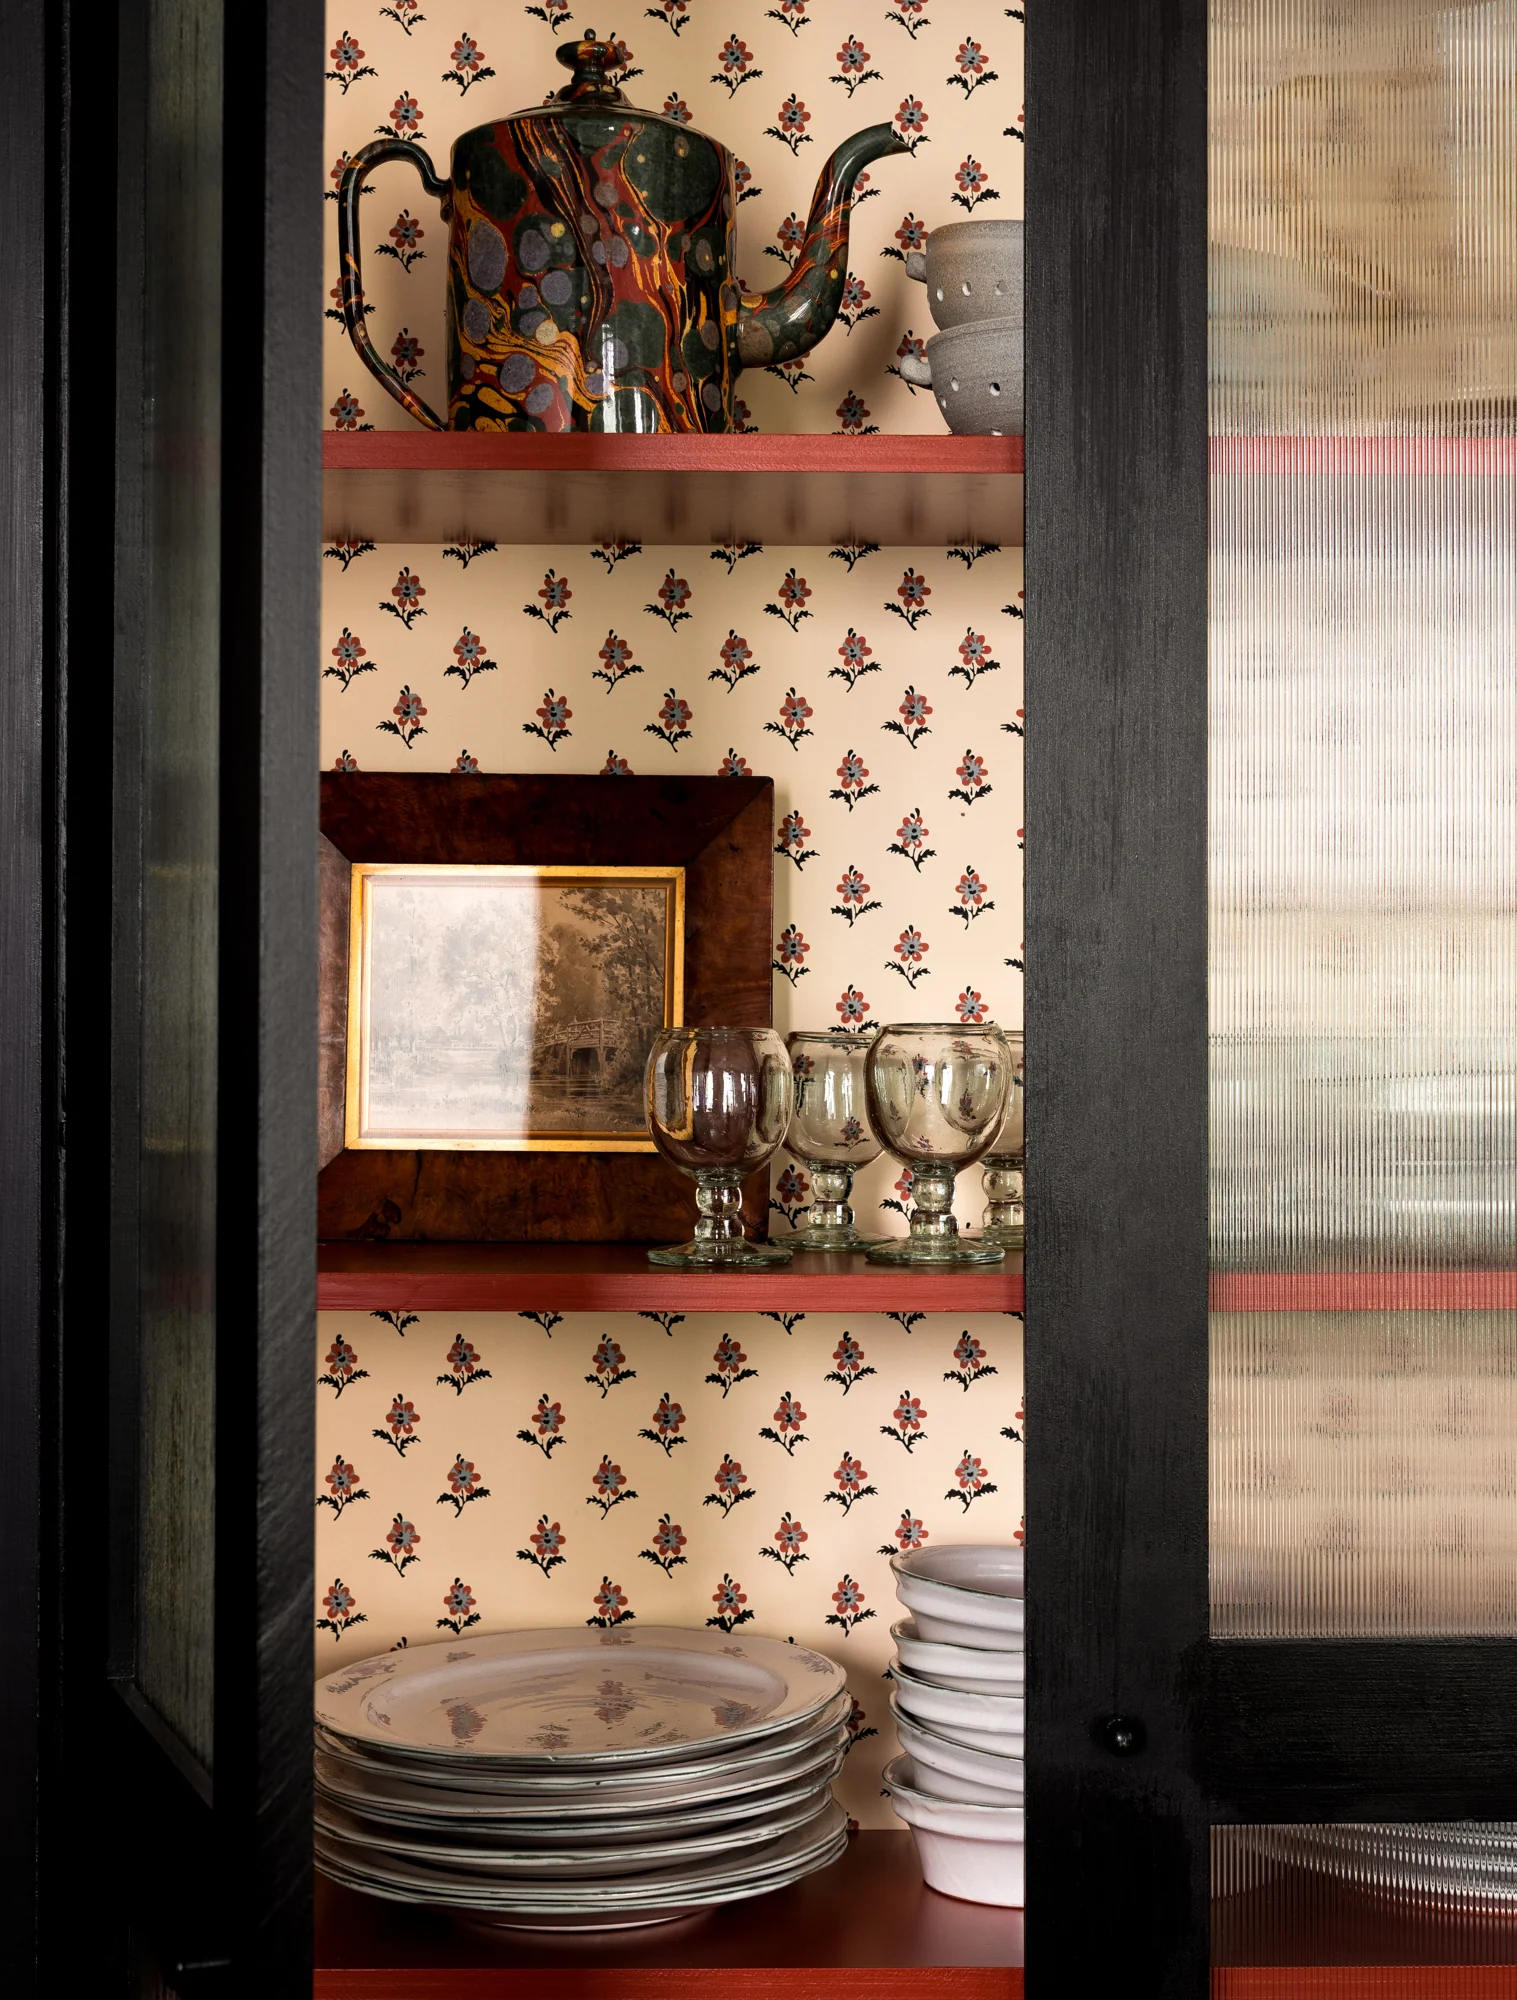 Love the wallpaper detail inside the cabinets!